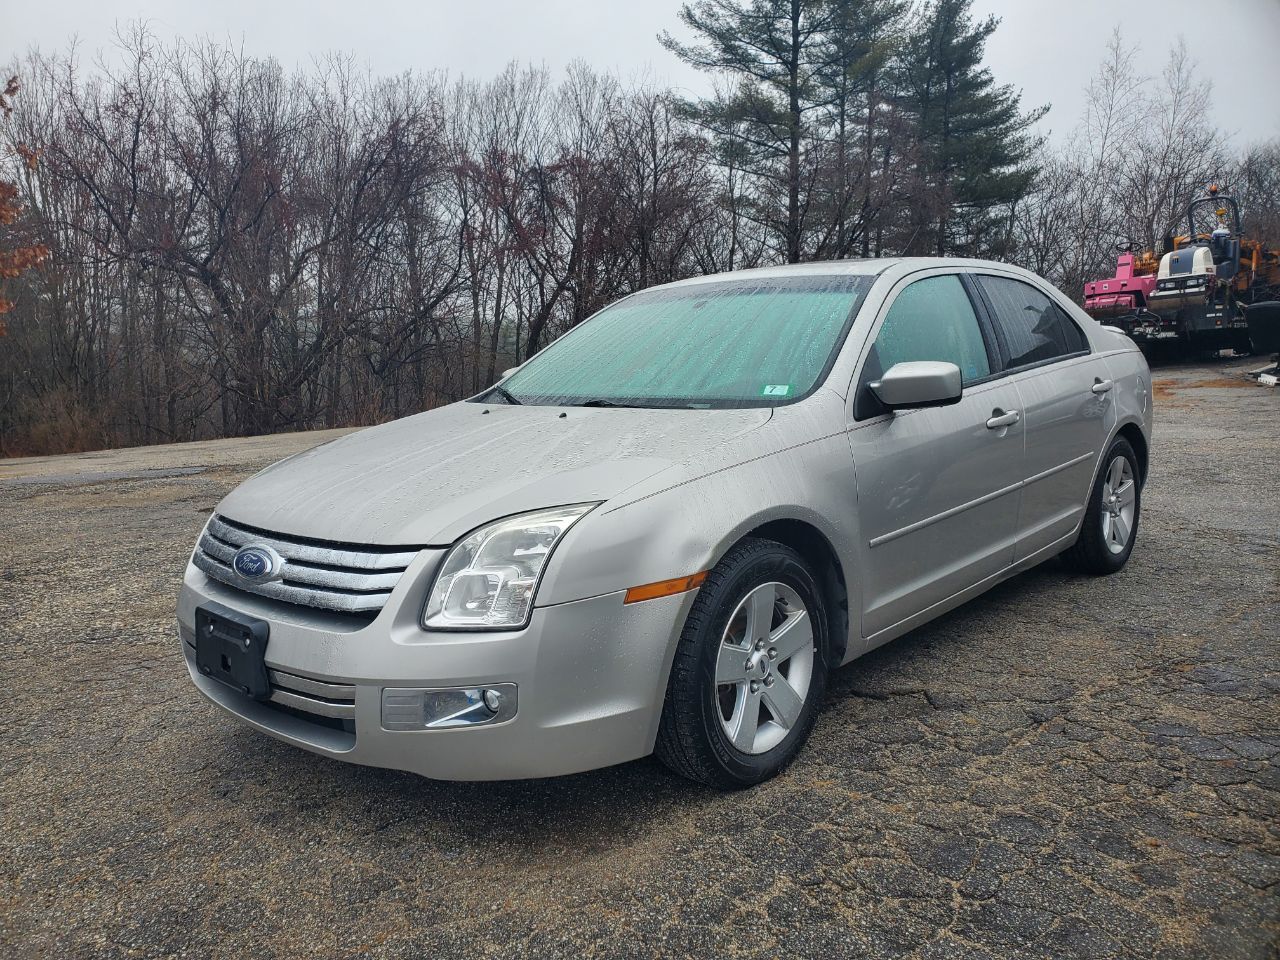 2007 Ford Fusion For Sale - Carsforsale.com®